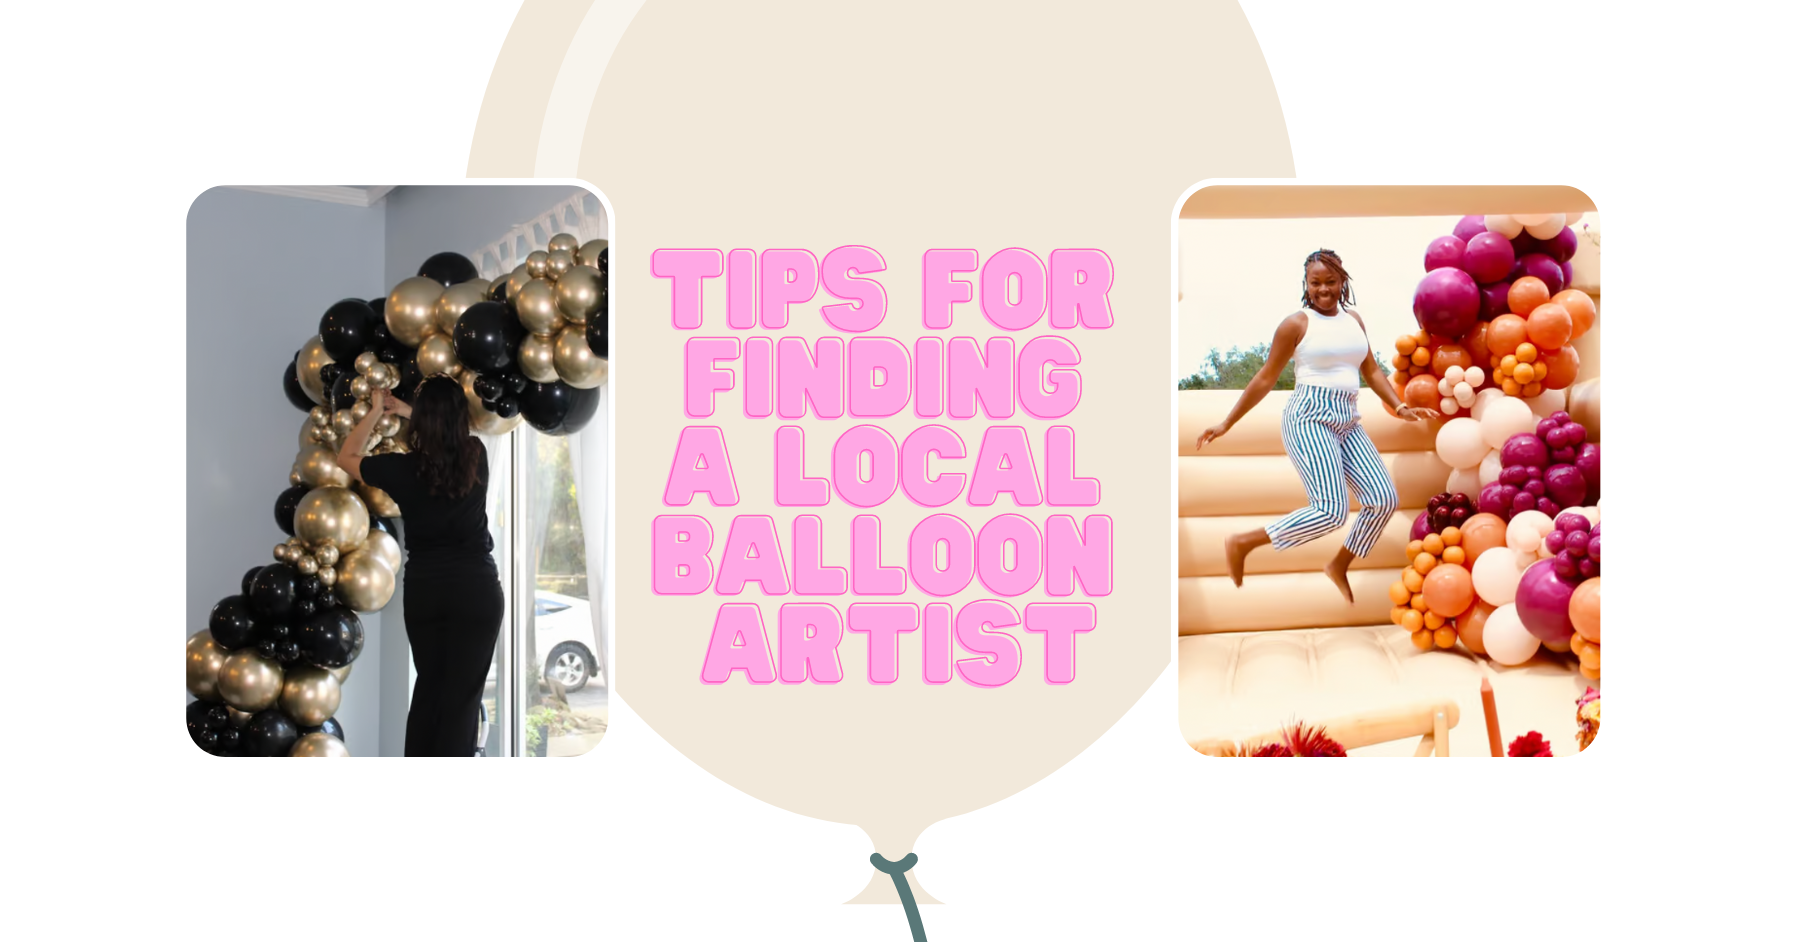 Tips for Finding a Local Balloon Artist